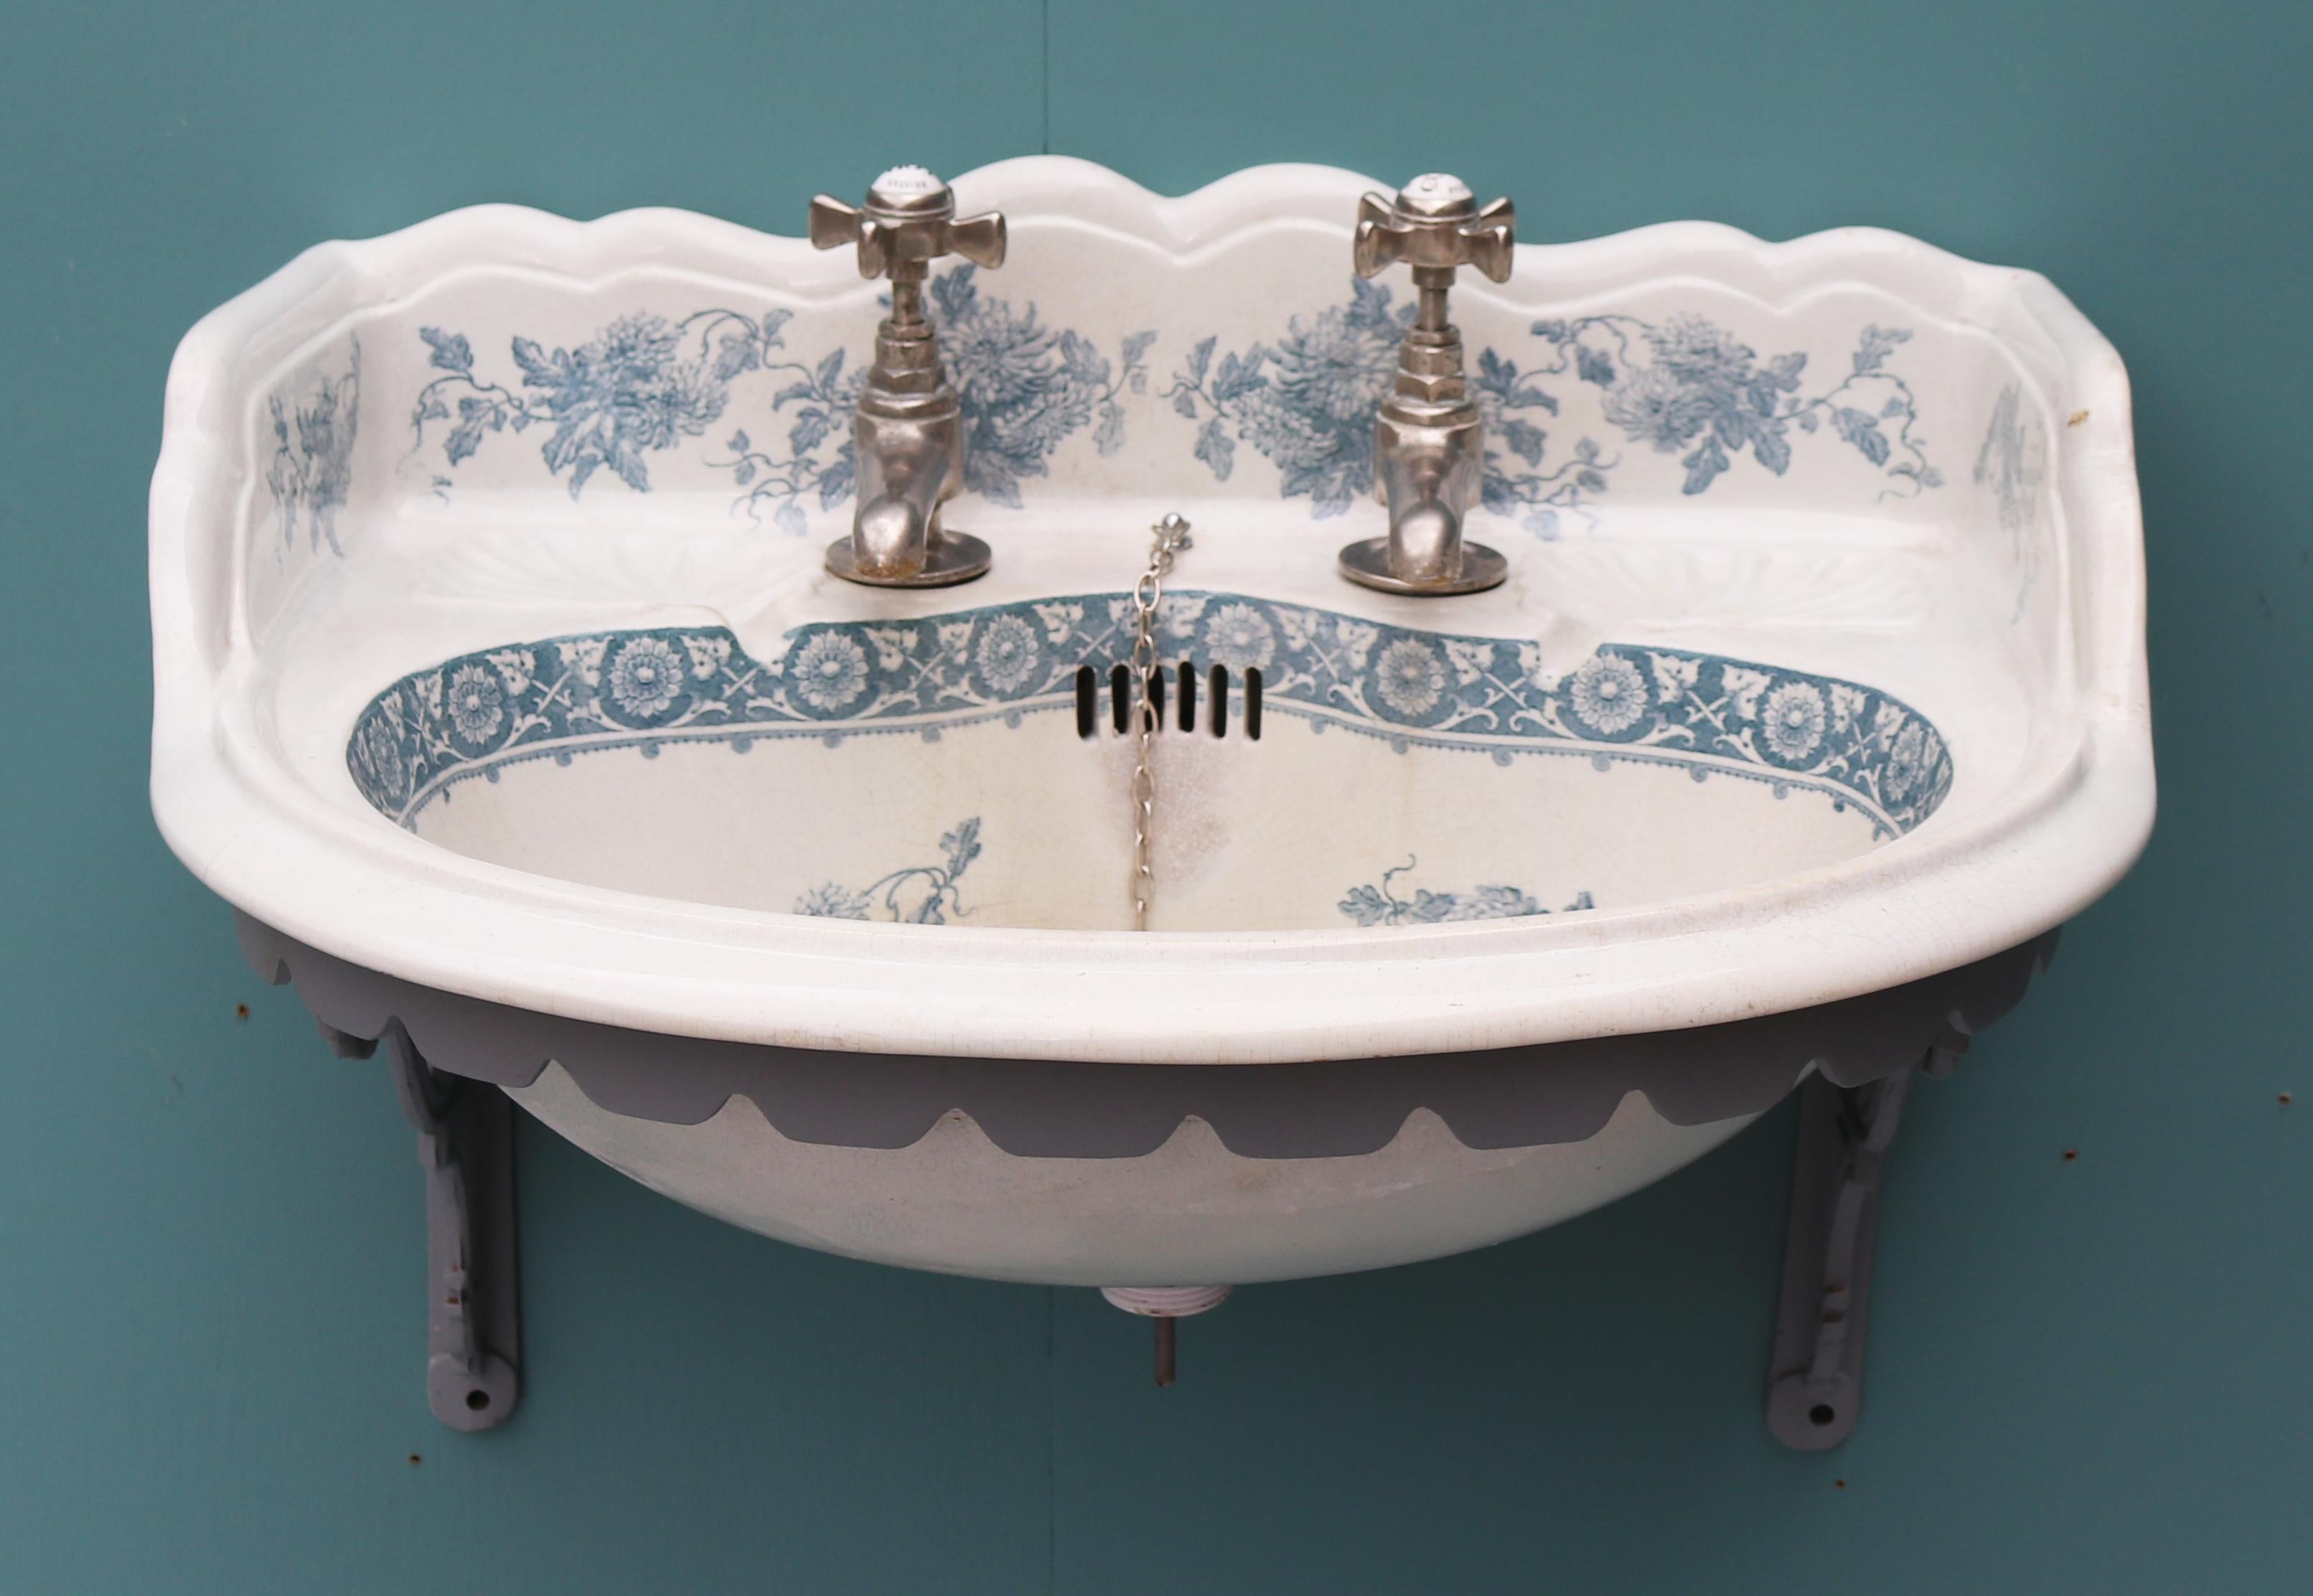 A reclaimed antique sink with its original cast iron wall mounted bracket.

 

Condition report

Good structural condition. There is slight discoloration to the bowl. The taps move freely, they are however untested. No cracks or